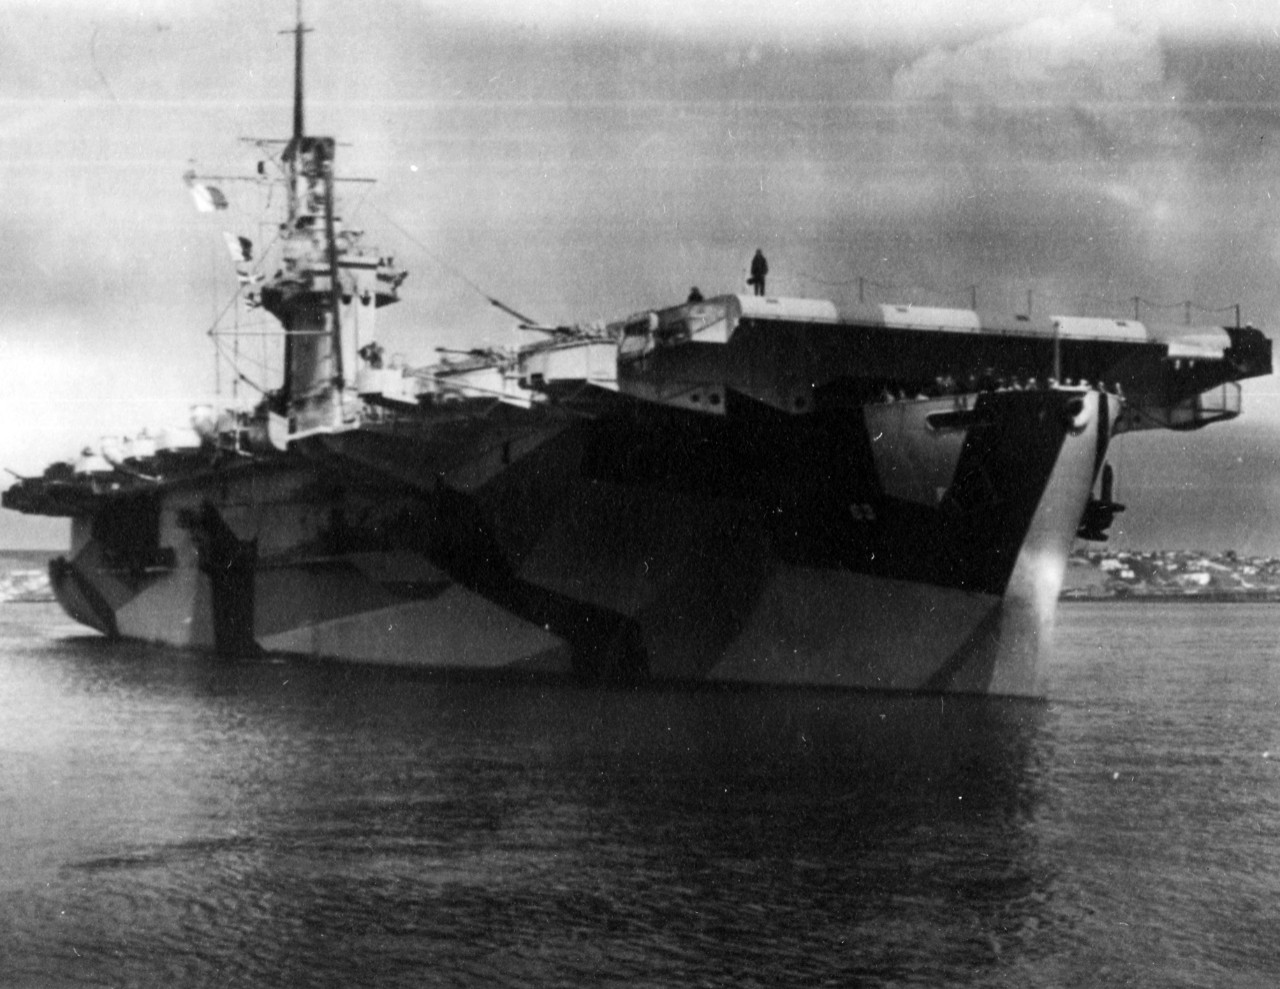 The bow of USS St. Lo (CVE-63), formerly USS Midway. April 7, 1944.